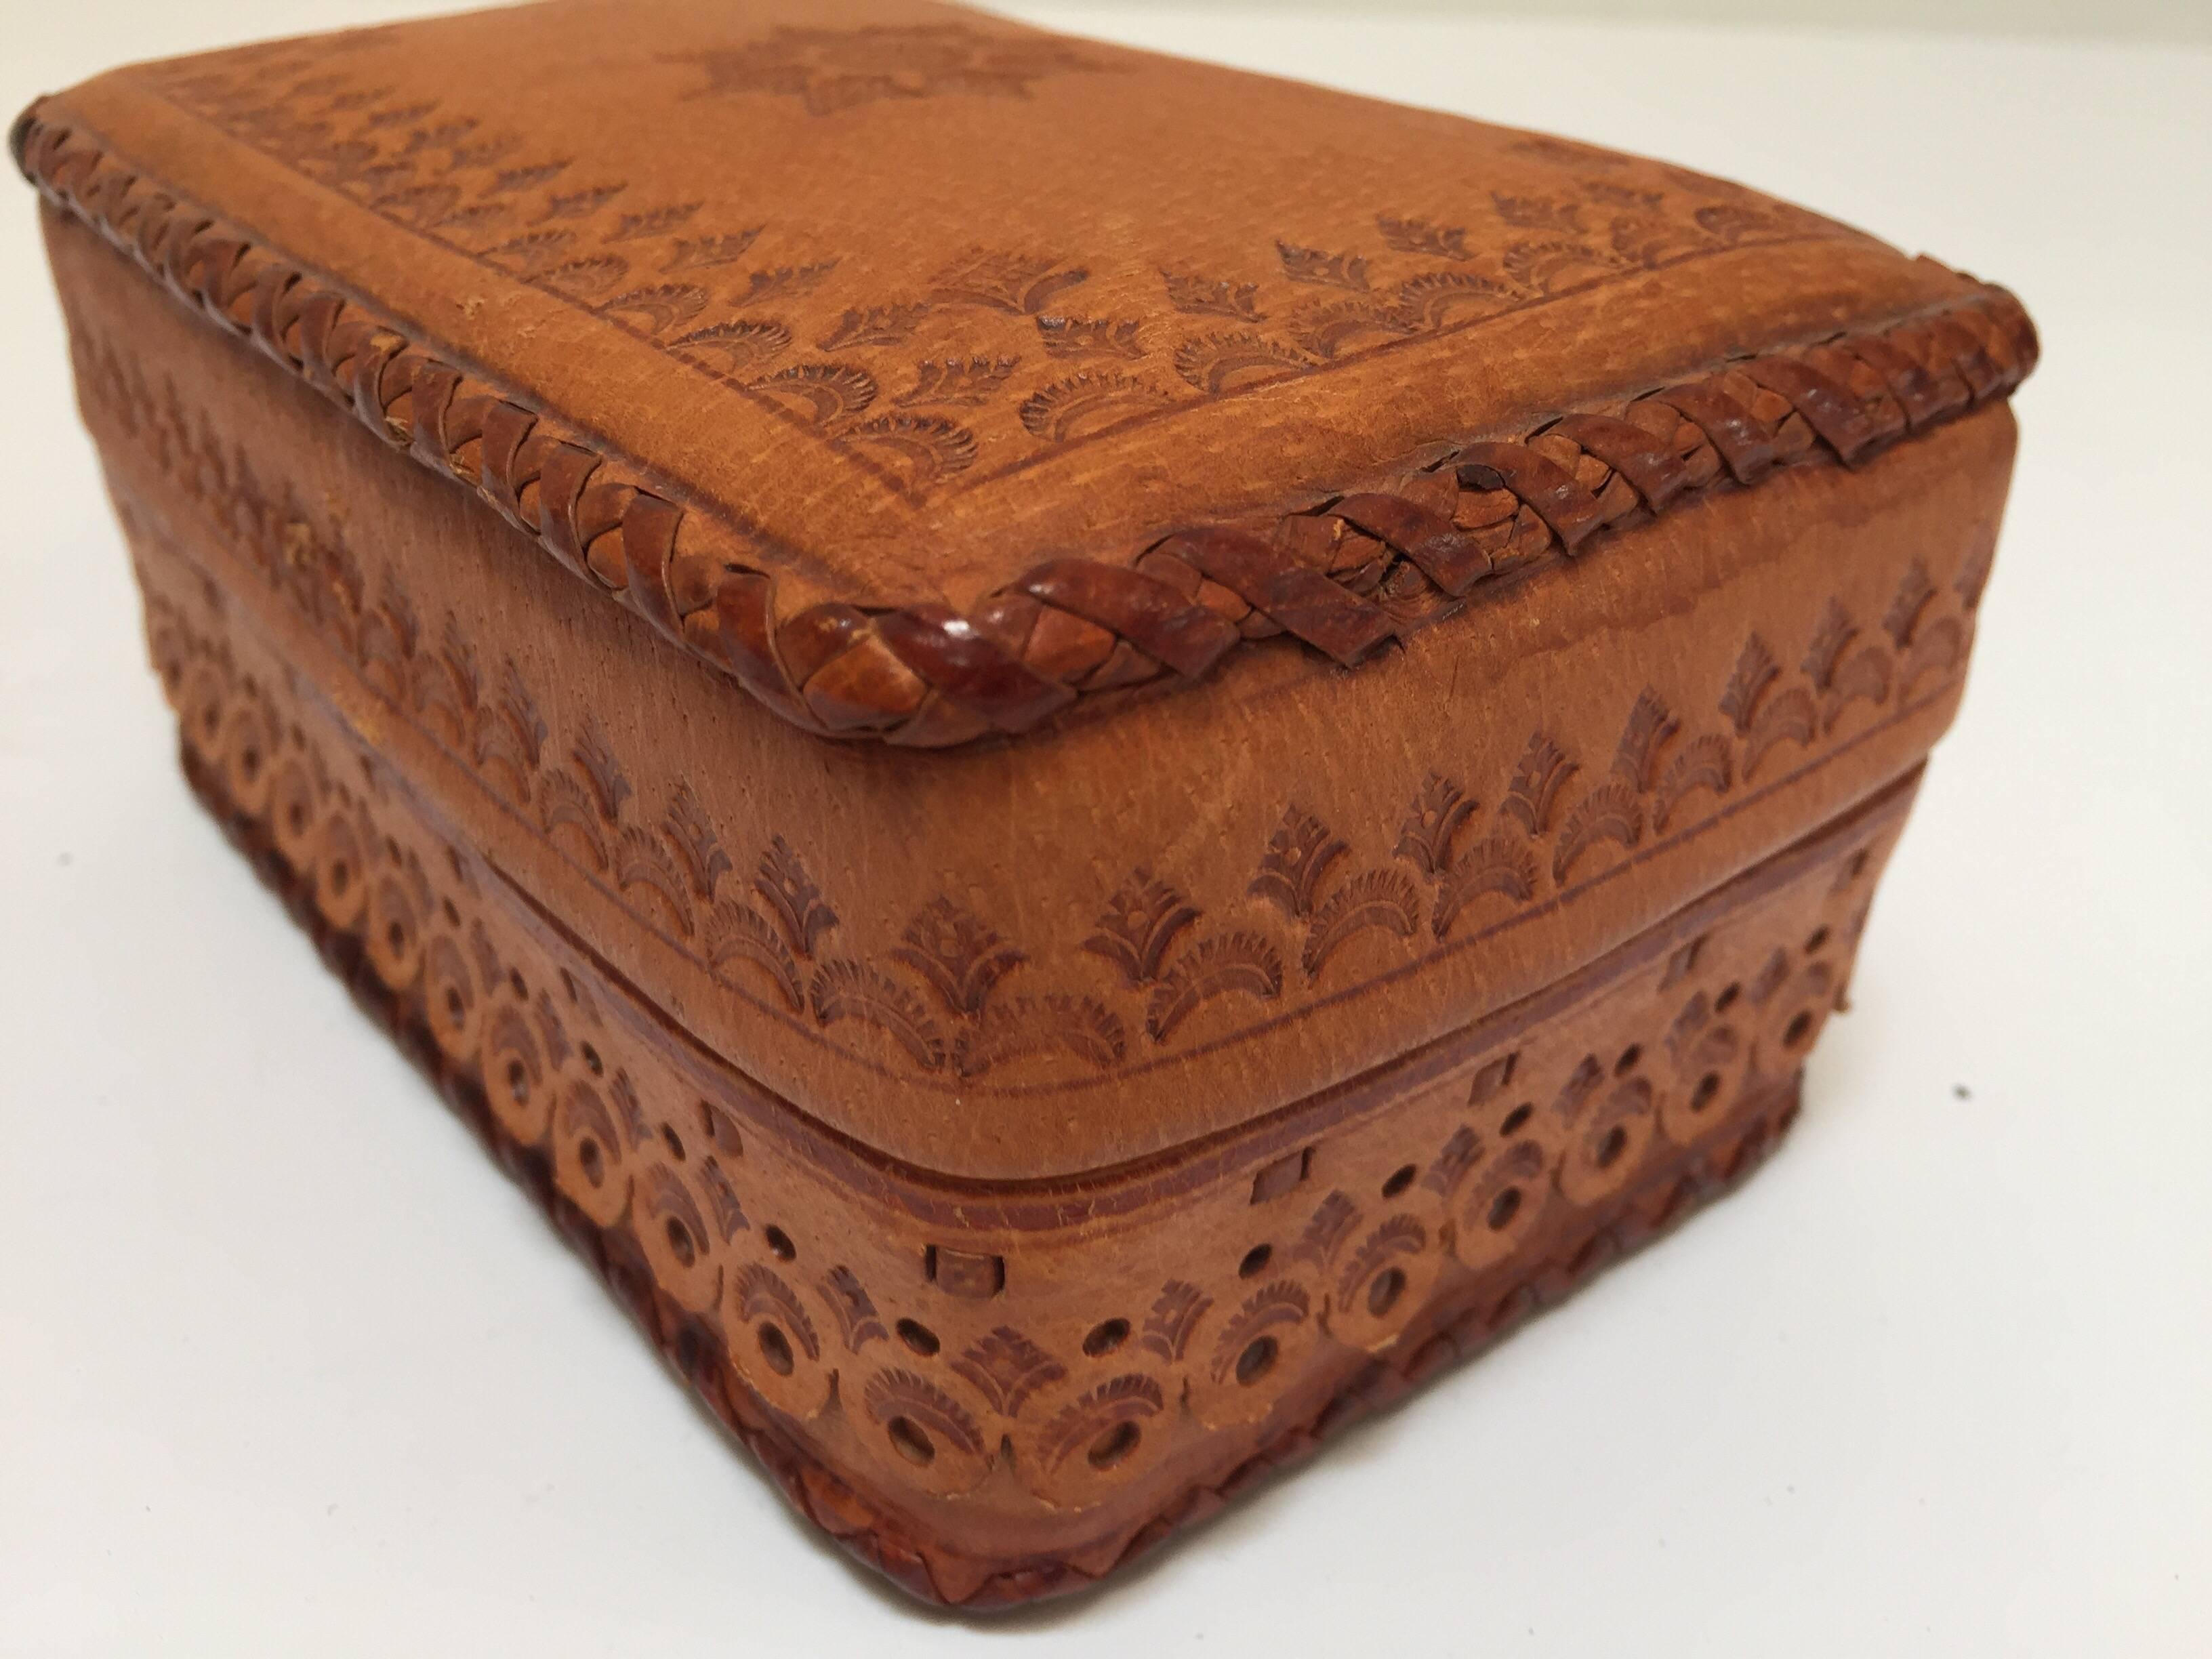 20th Century Leather Vintage Brown Box Hand Tooled in Morocco with Tribal African Designs